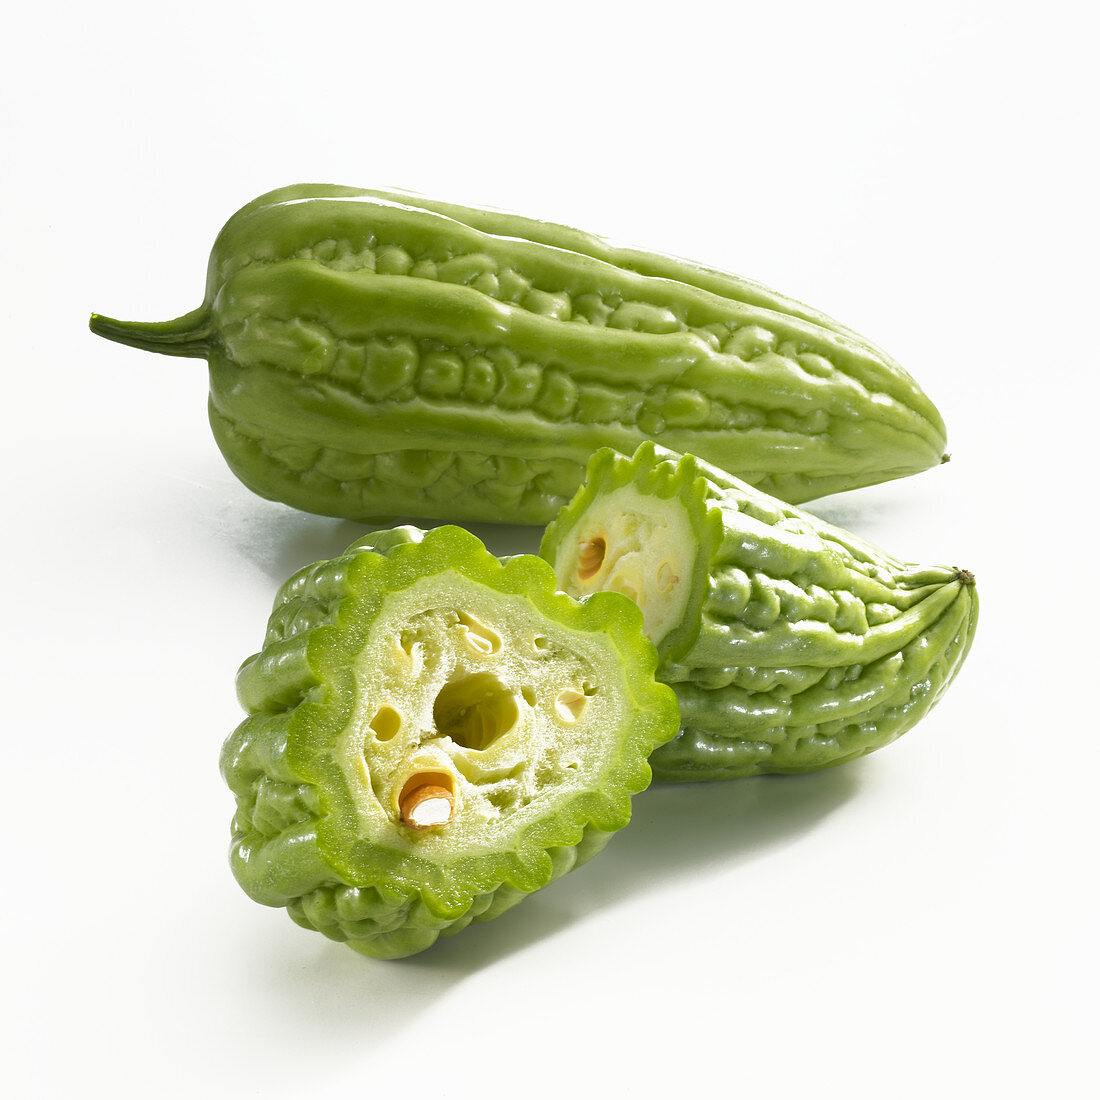 A whole and a halved bitter cucumber on a white background